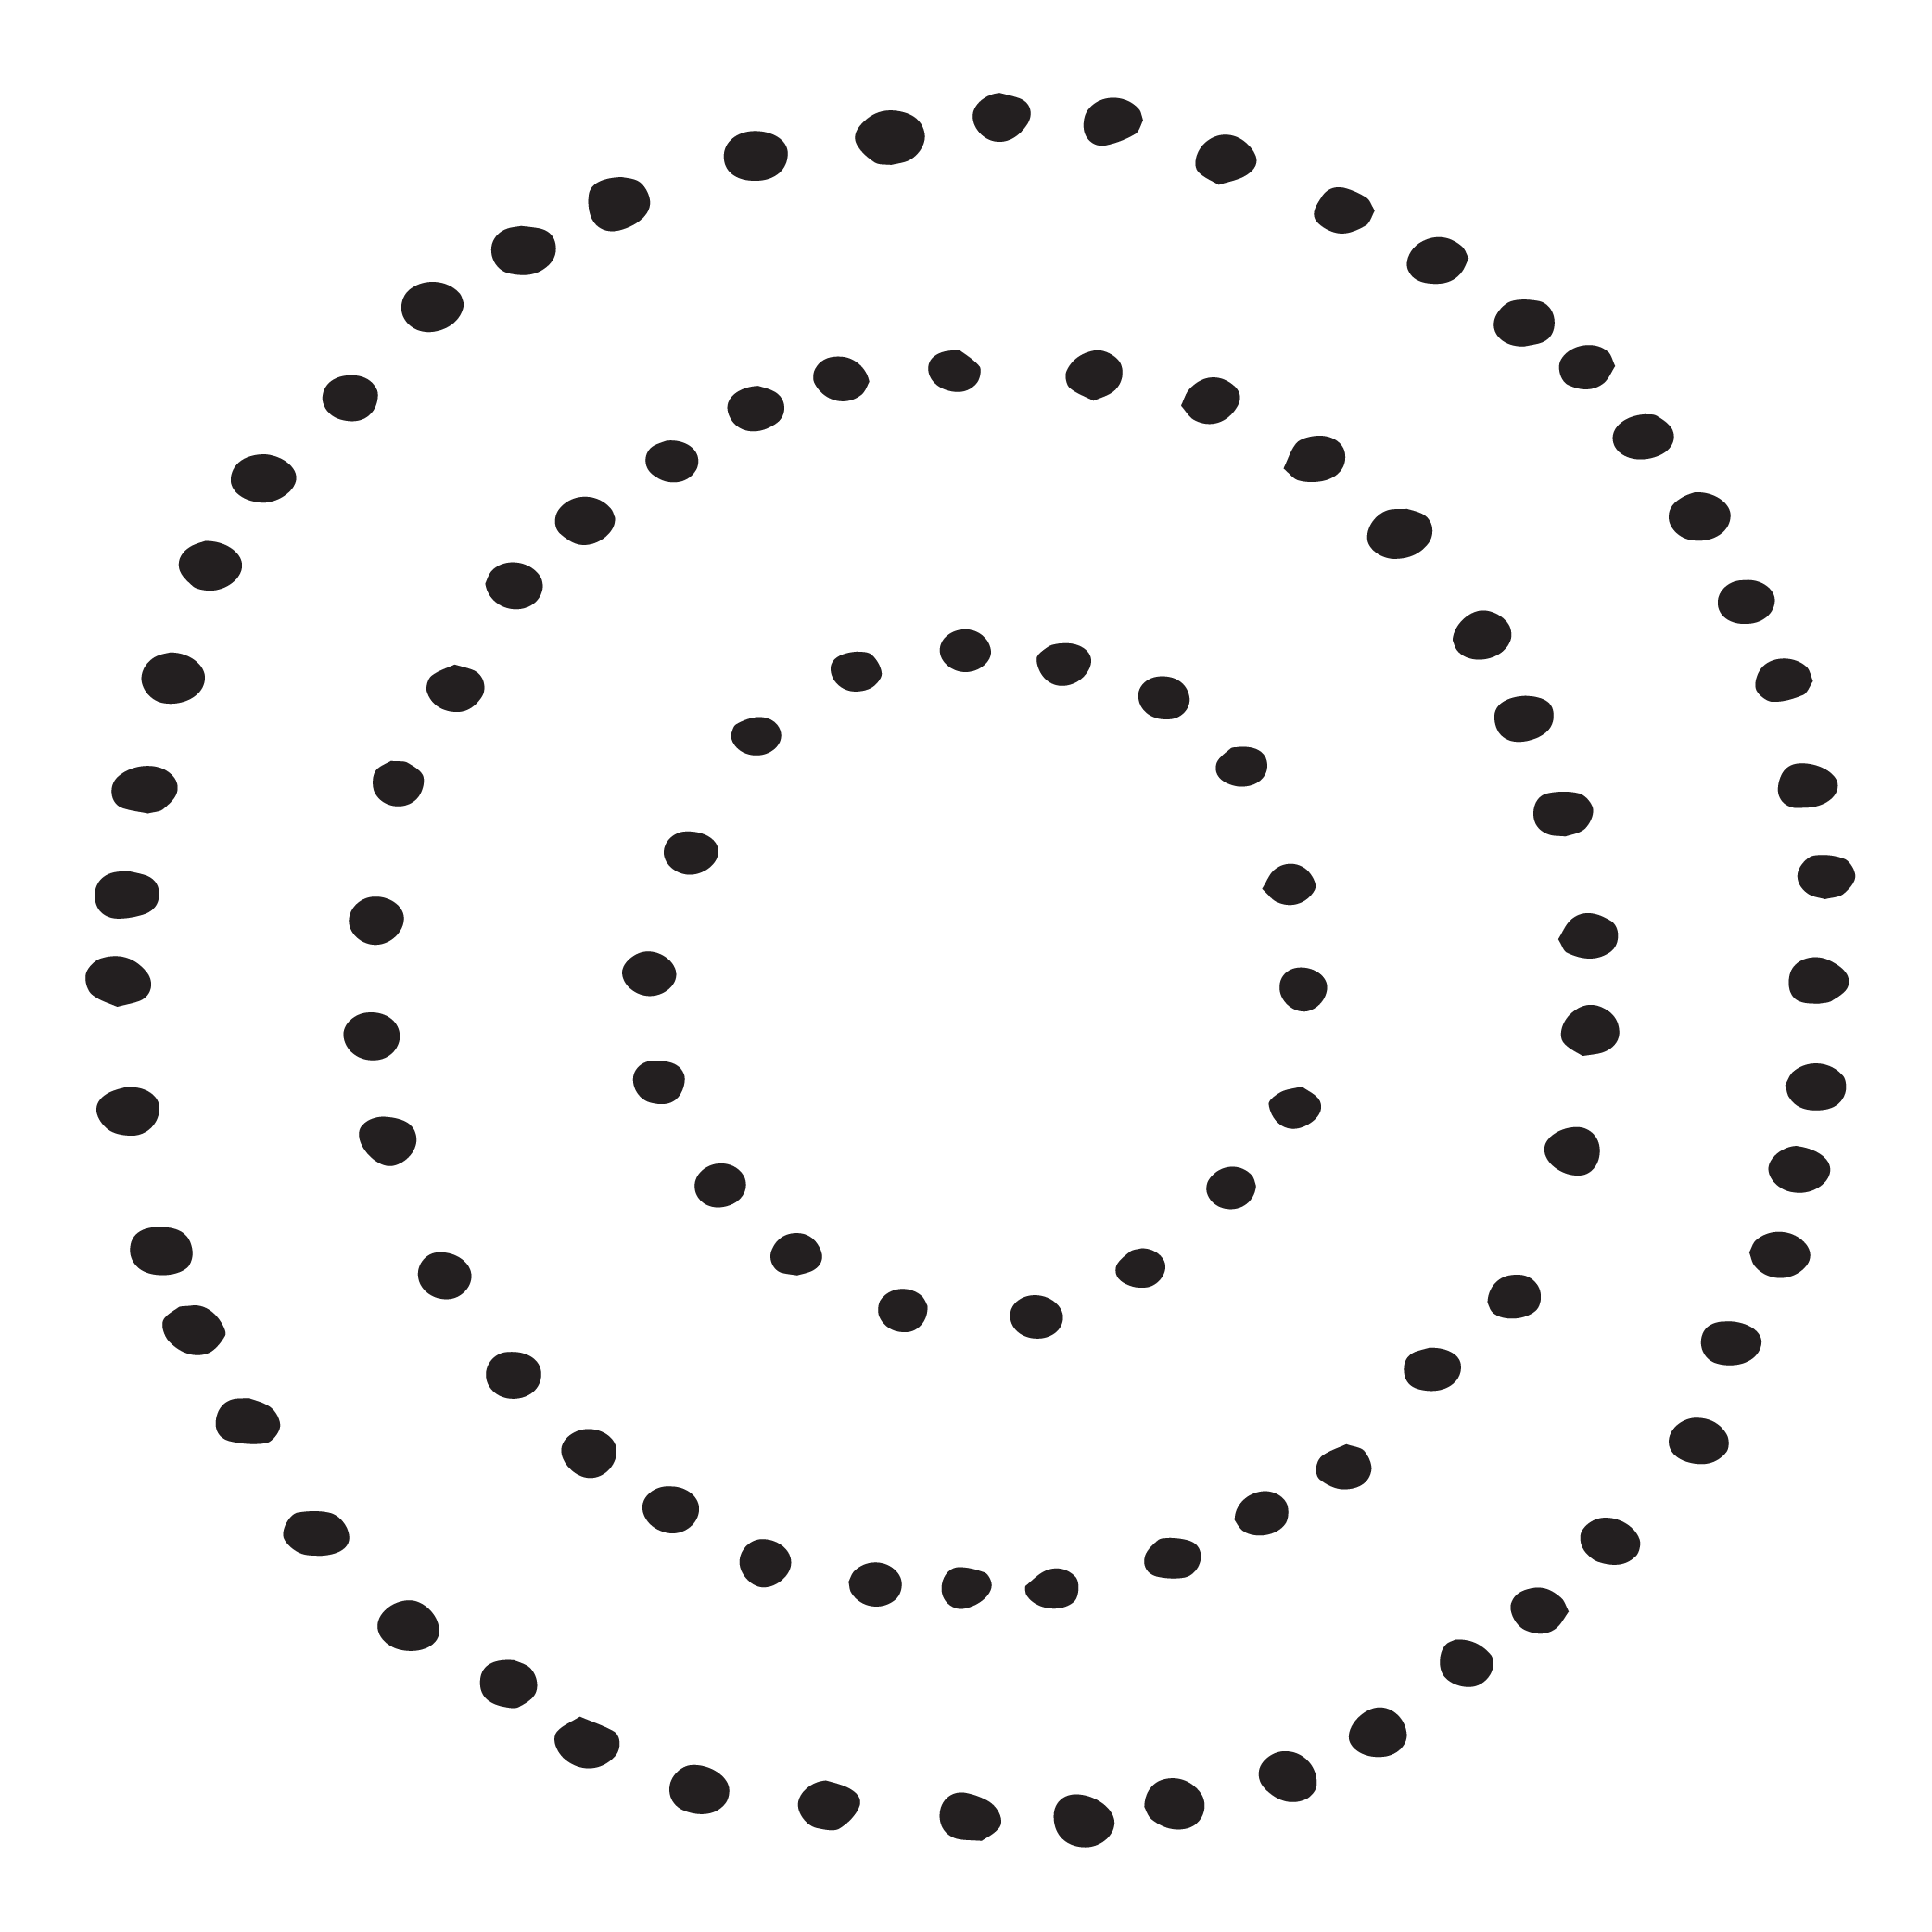 dots in a circle shape